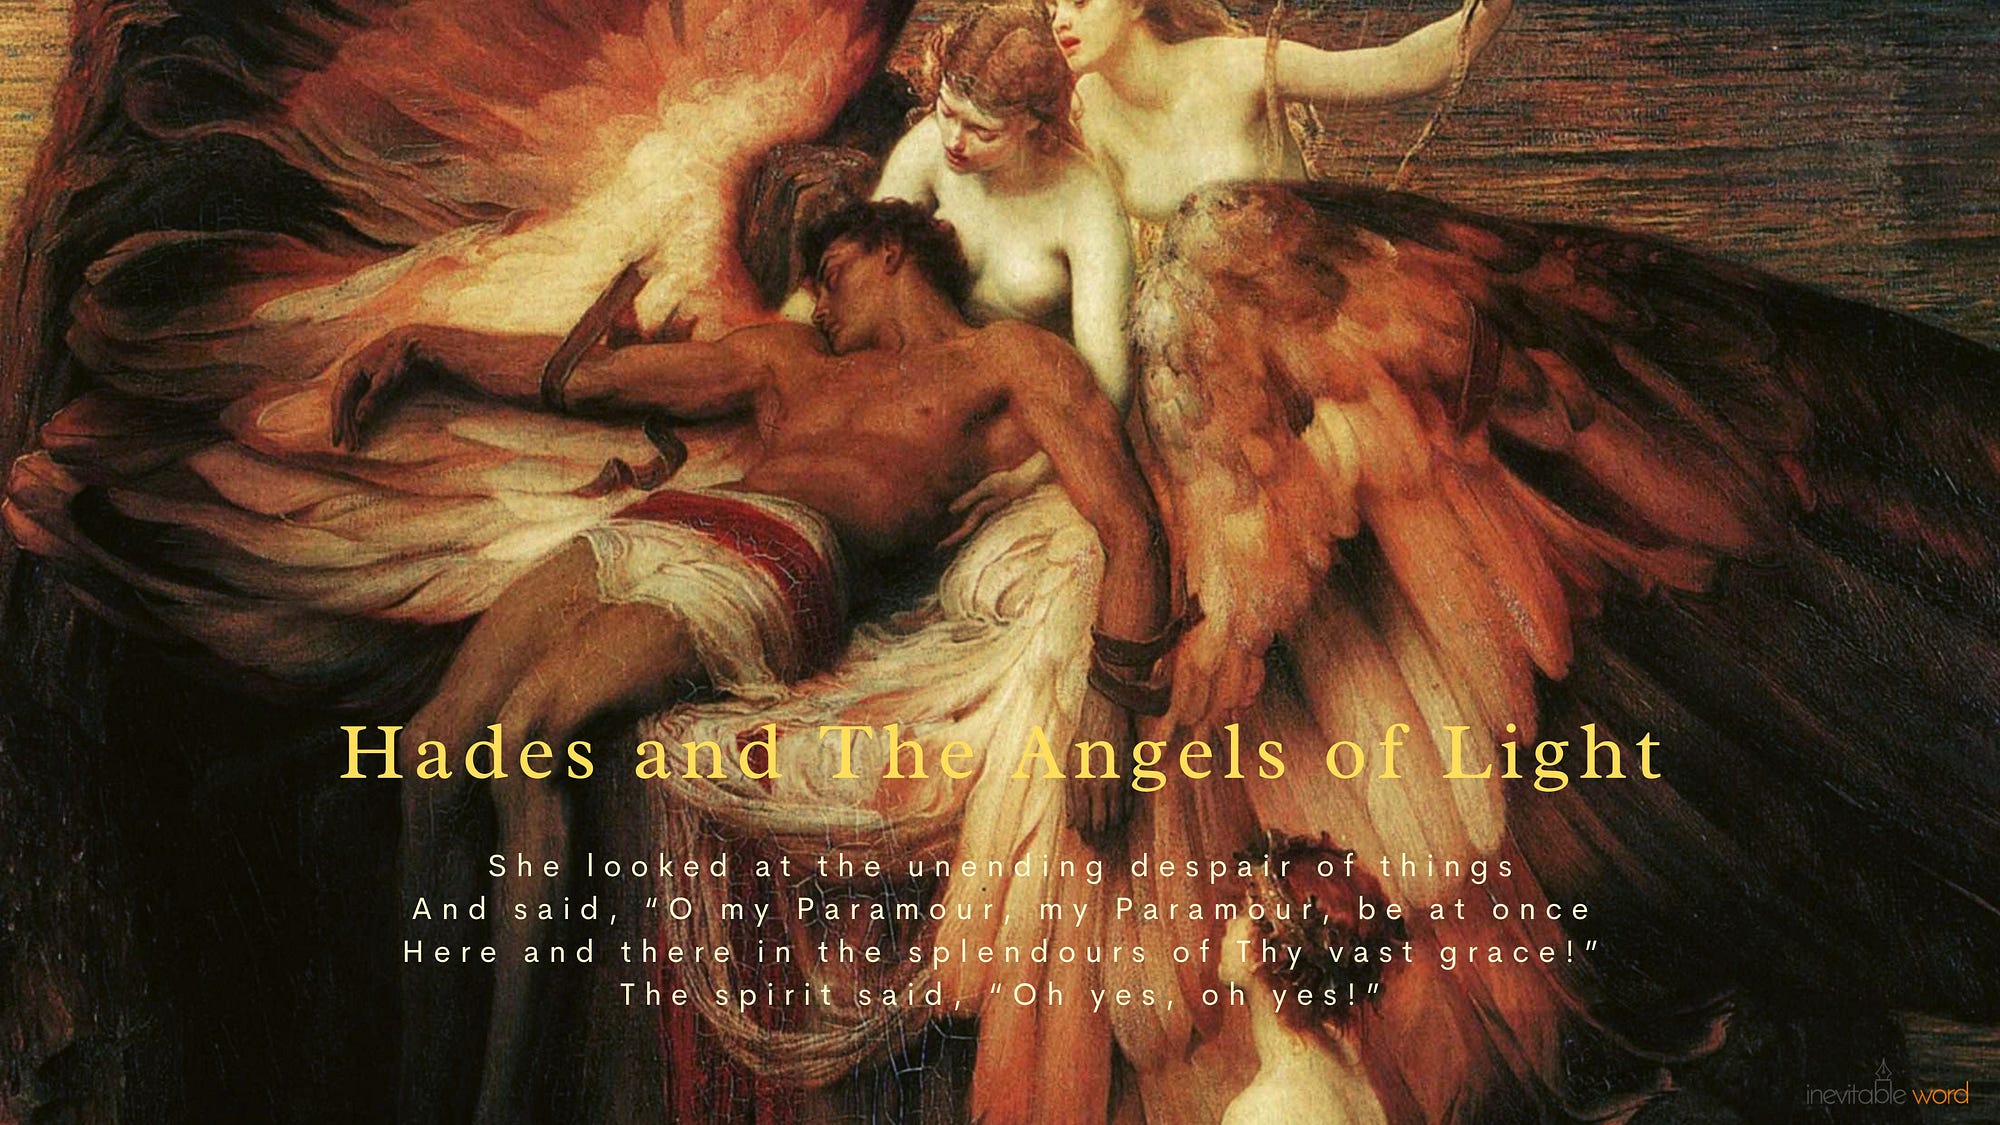 Hades and The Angels of Light. Poem, by Murli R